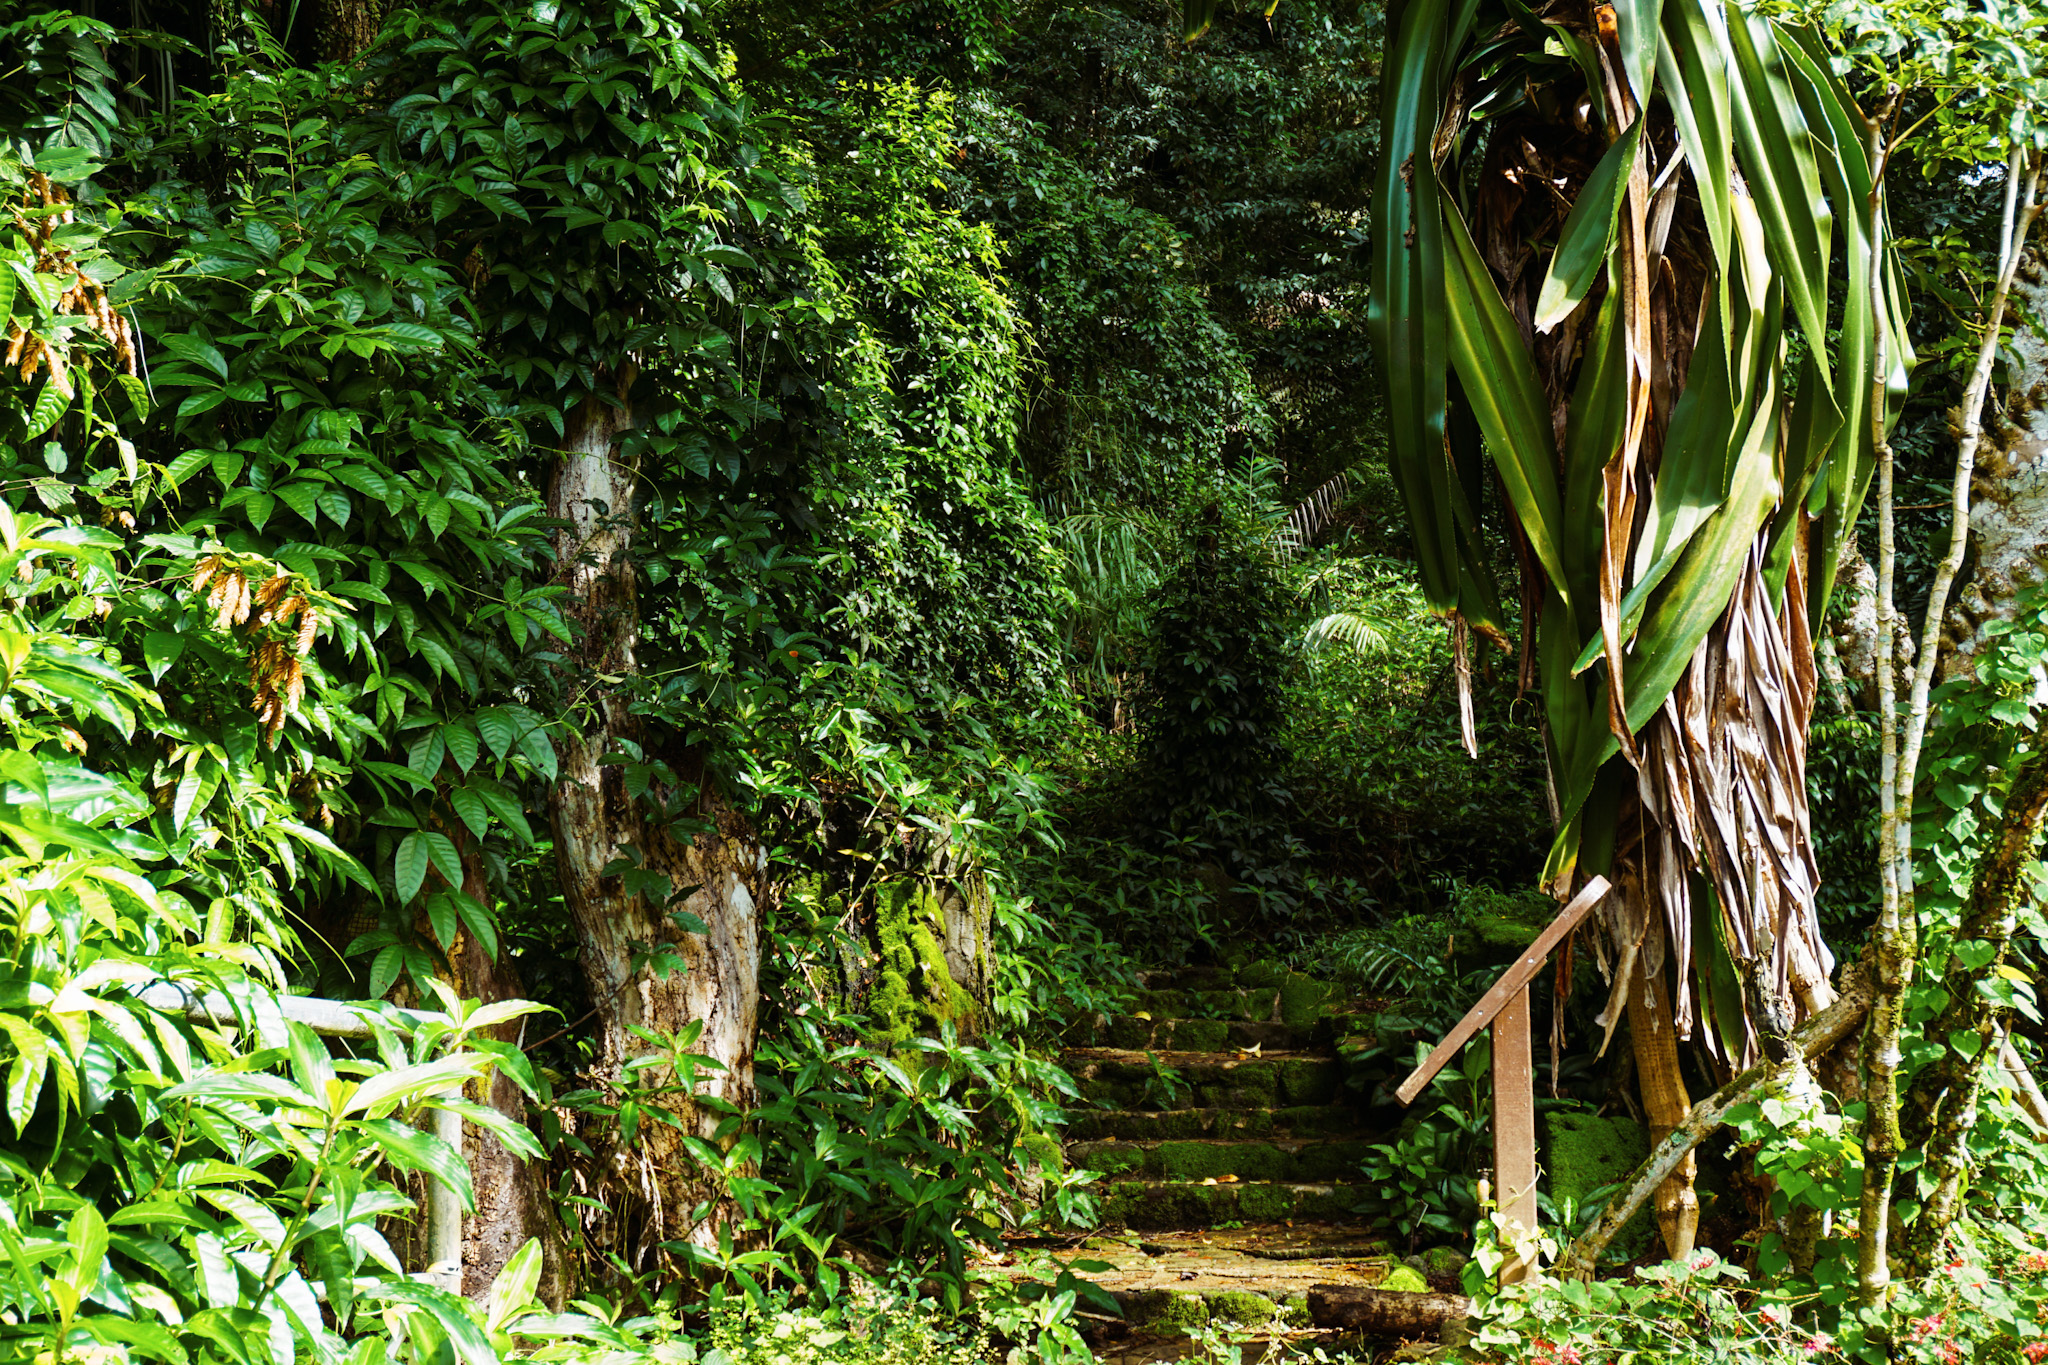 Staircase surrounded by lush green tropical foliage in hawaii botanical garden